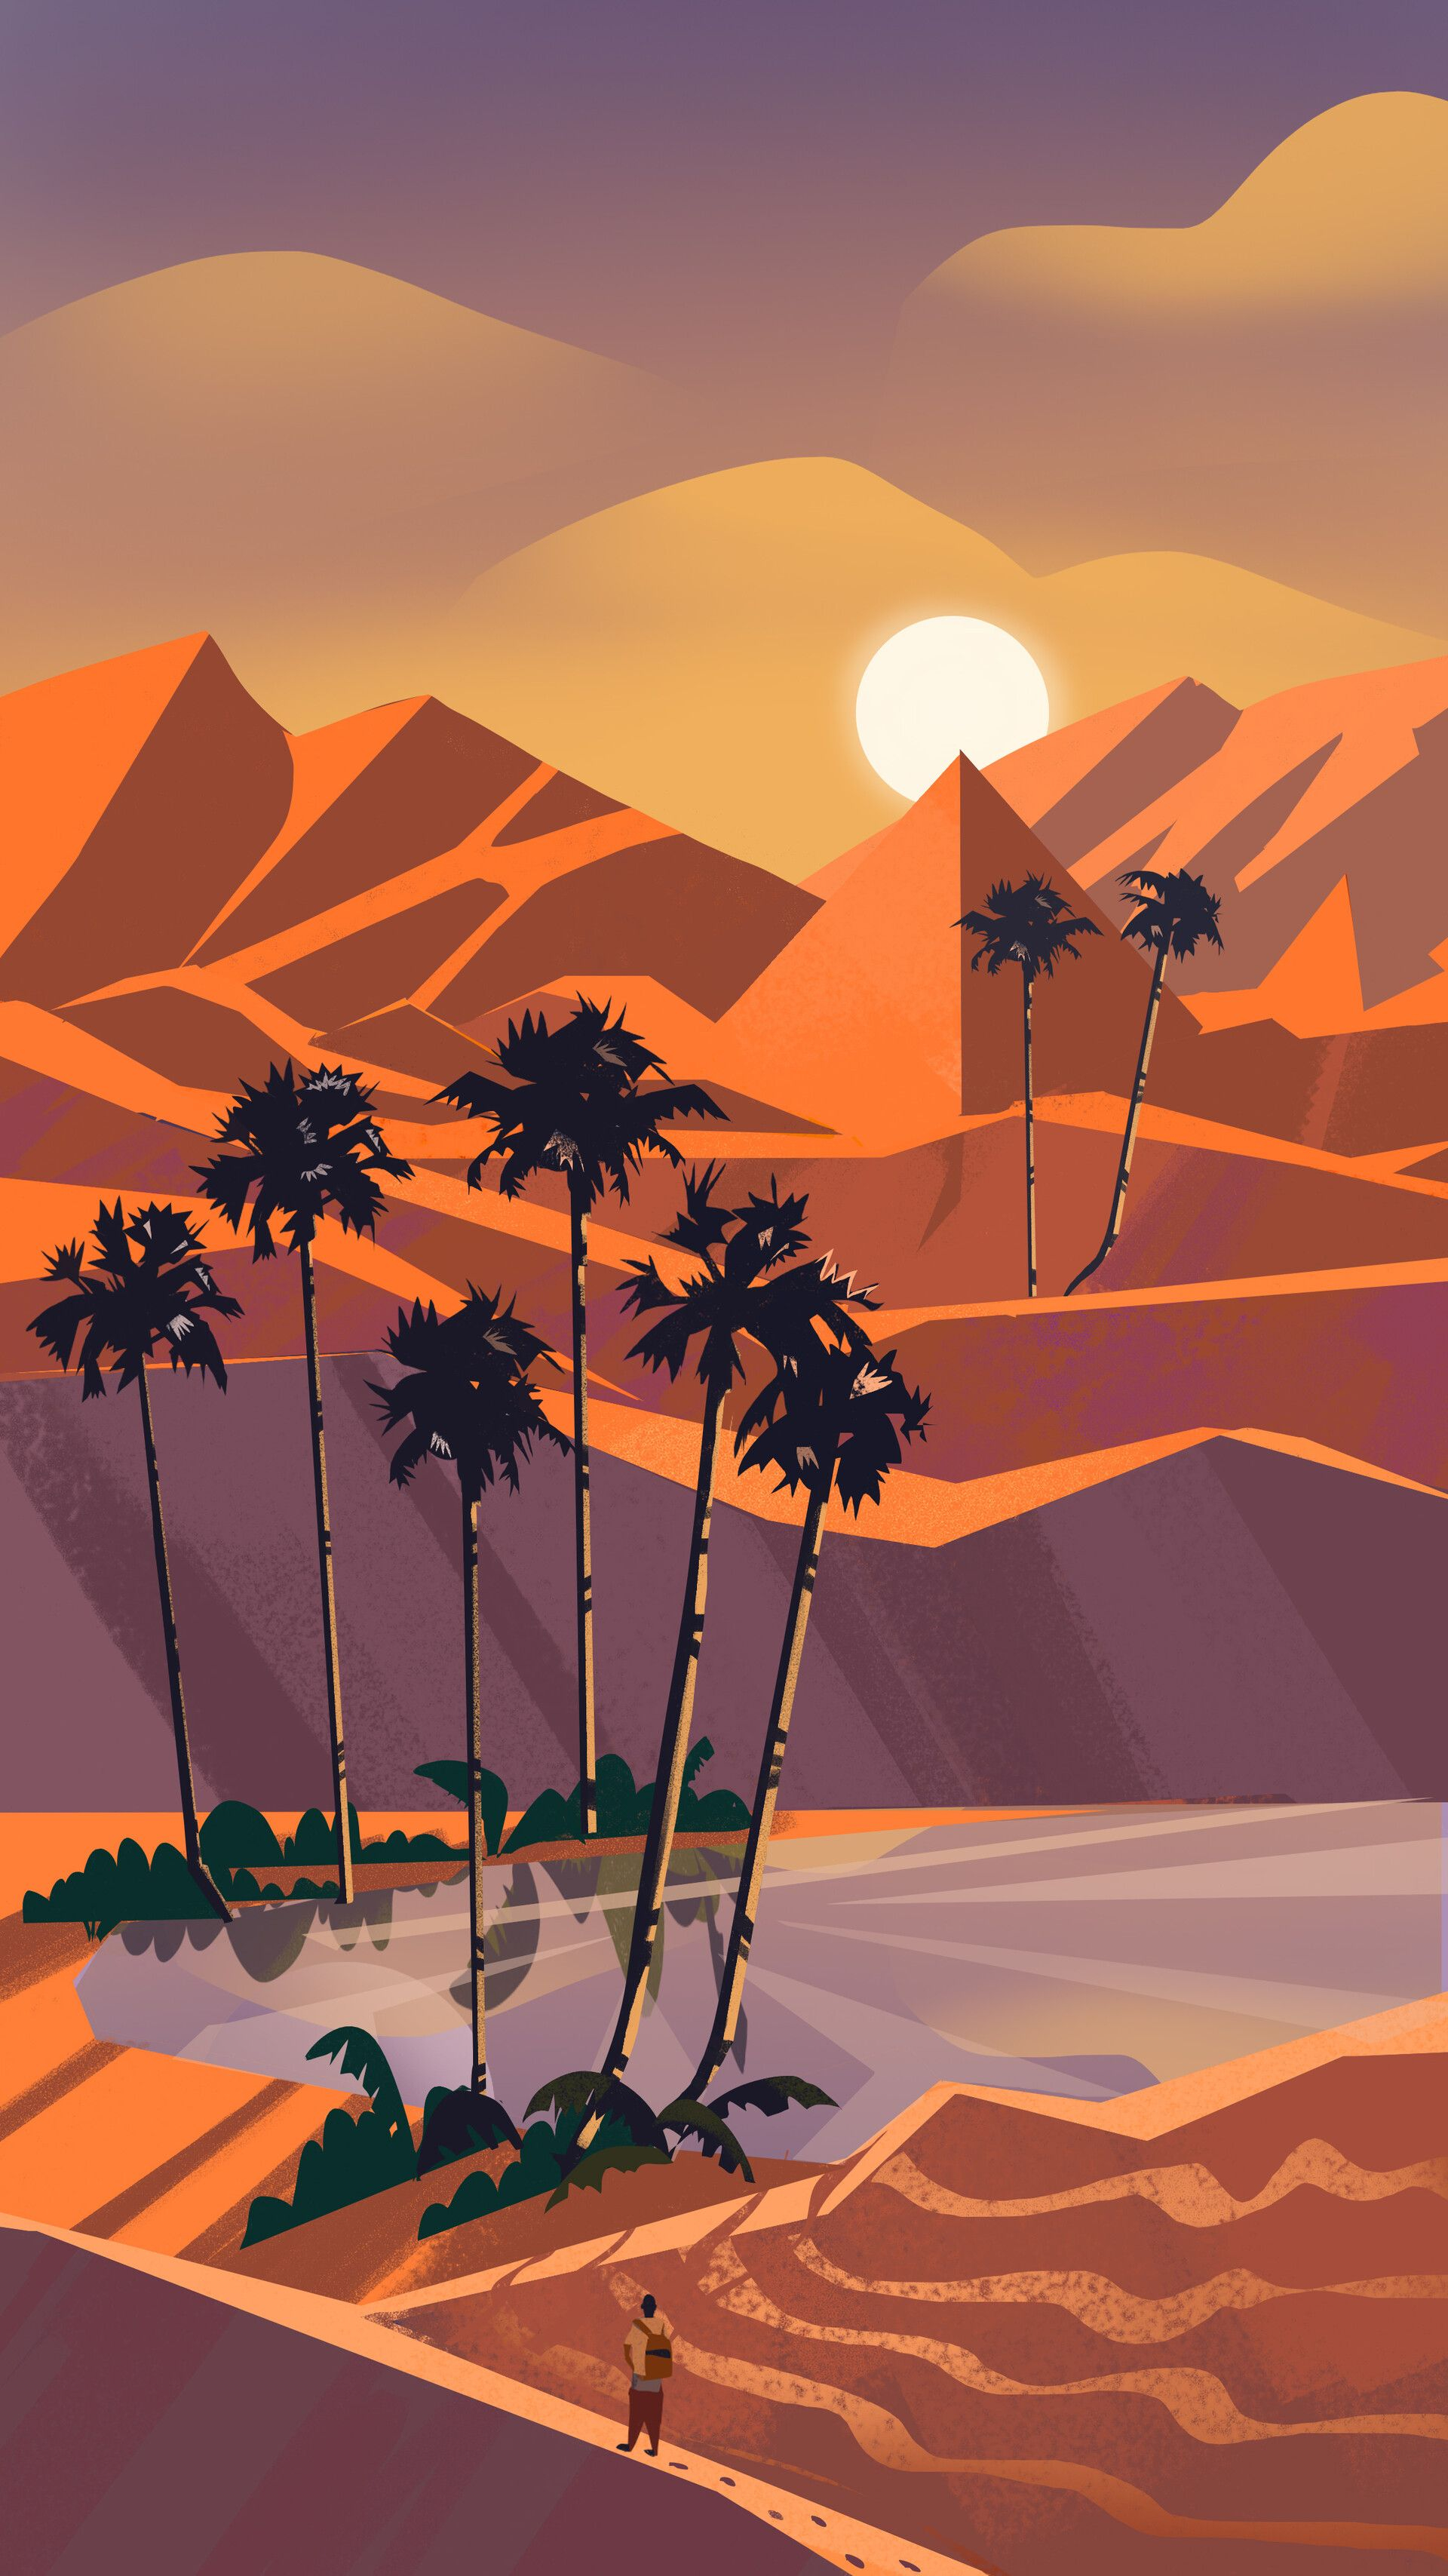 1920x3415 Oasis by Yury Solntsevspeedpaint Illustration for the Tellme coloring book | Landscape illustration, Scenery wallpaper, Abstract iphone wallpaper